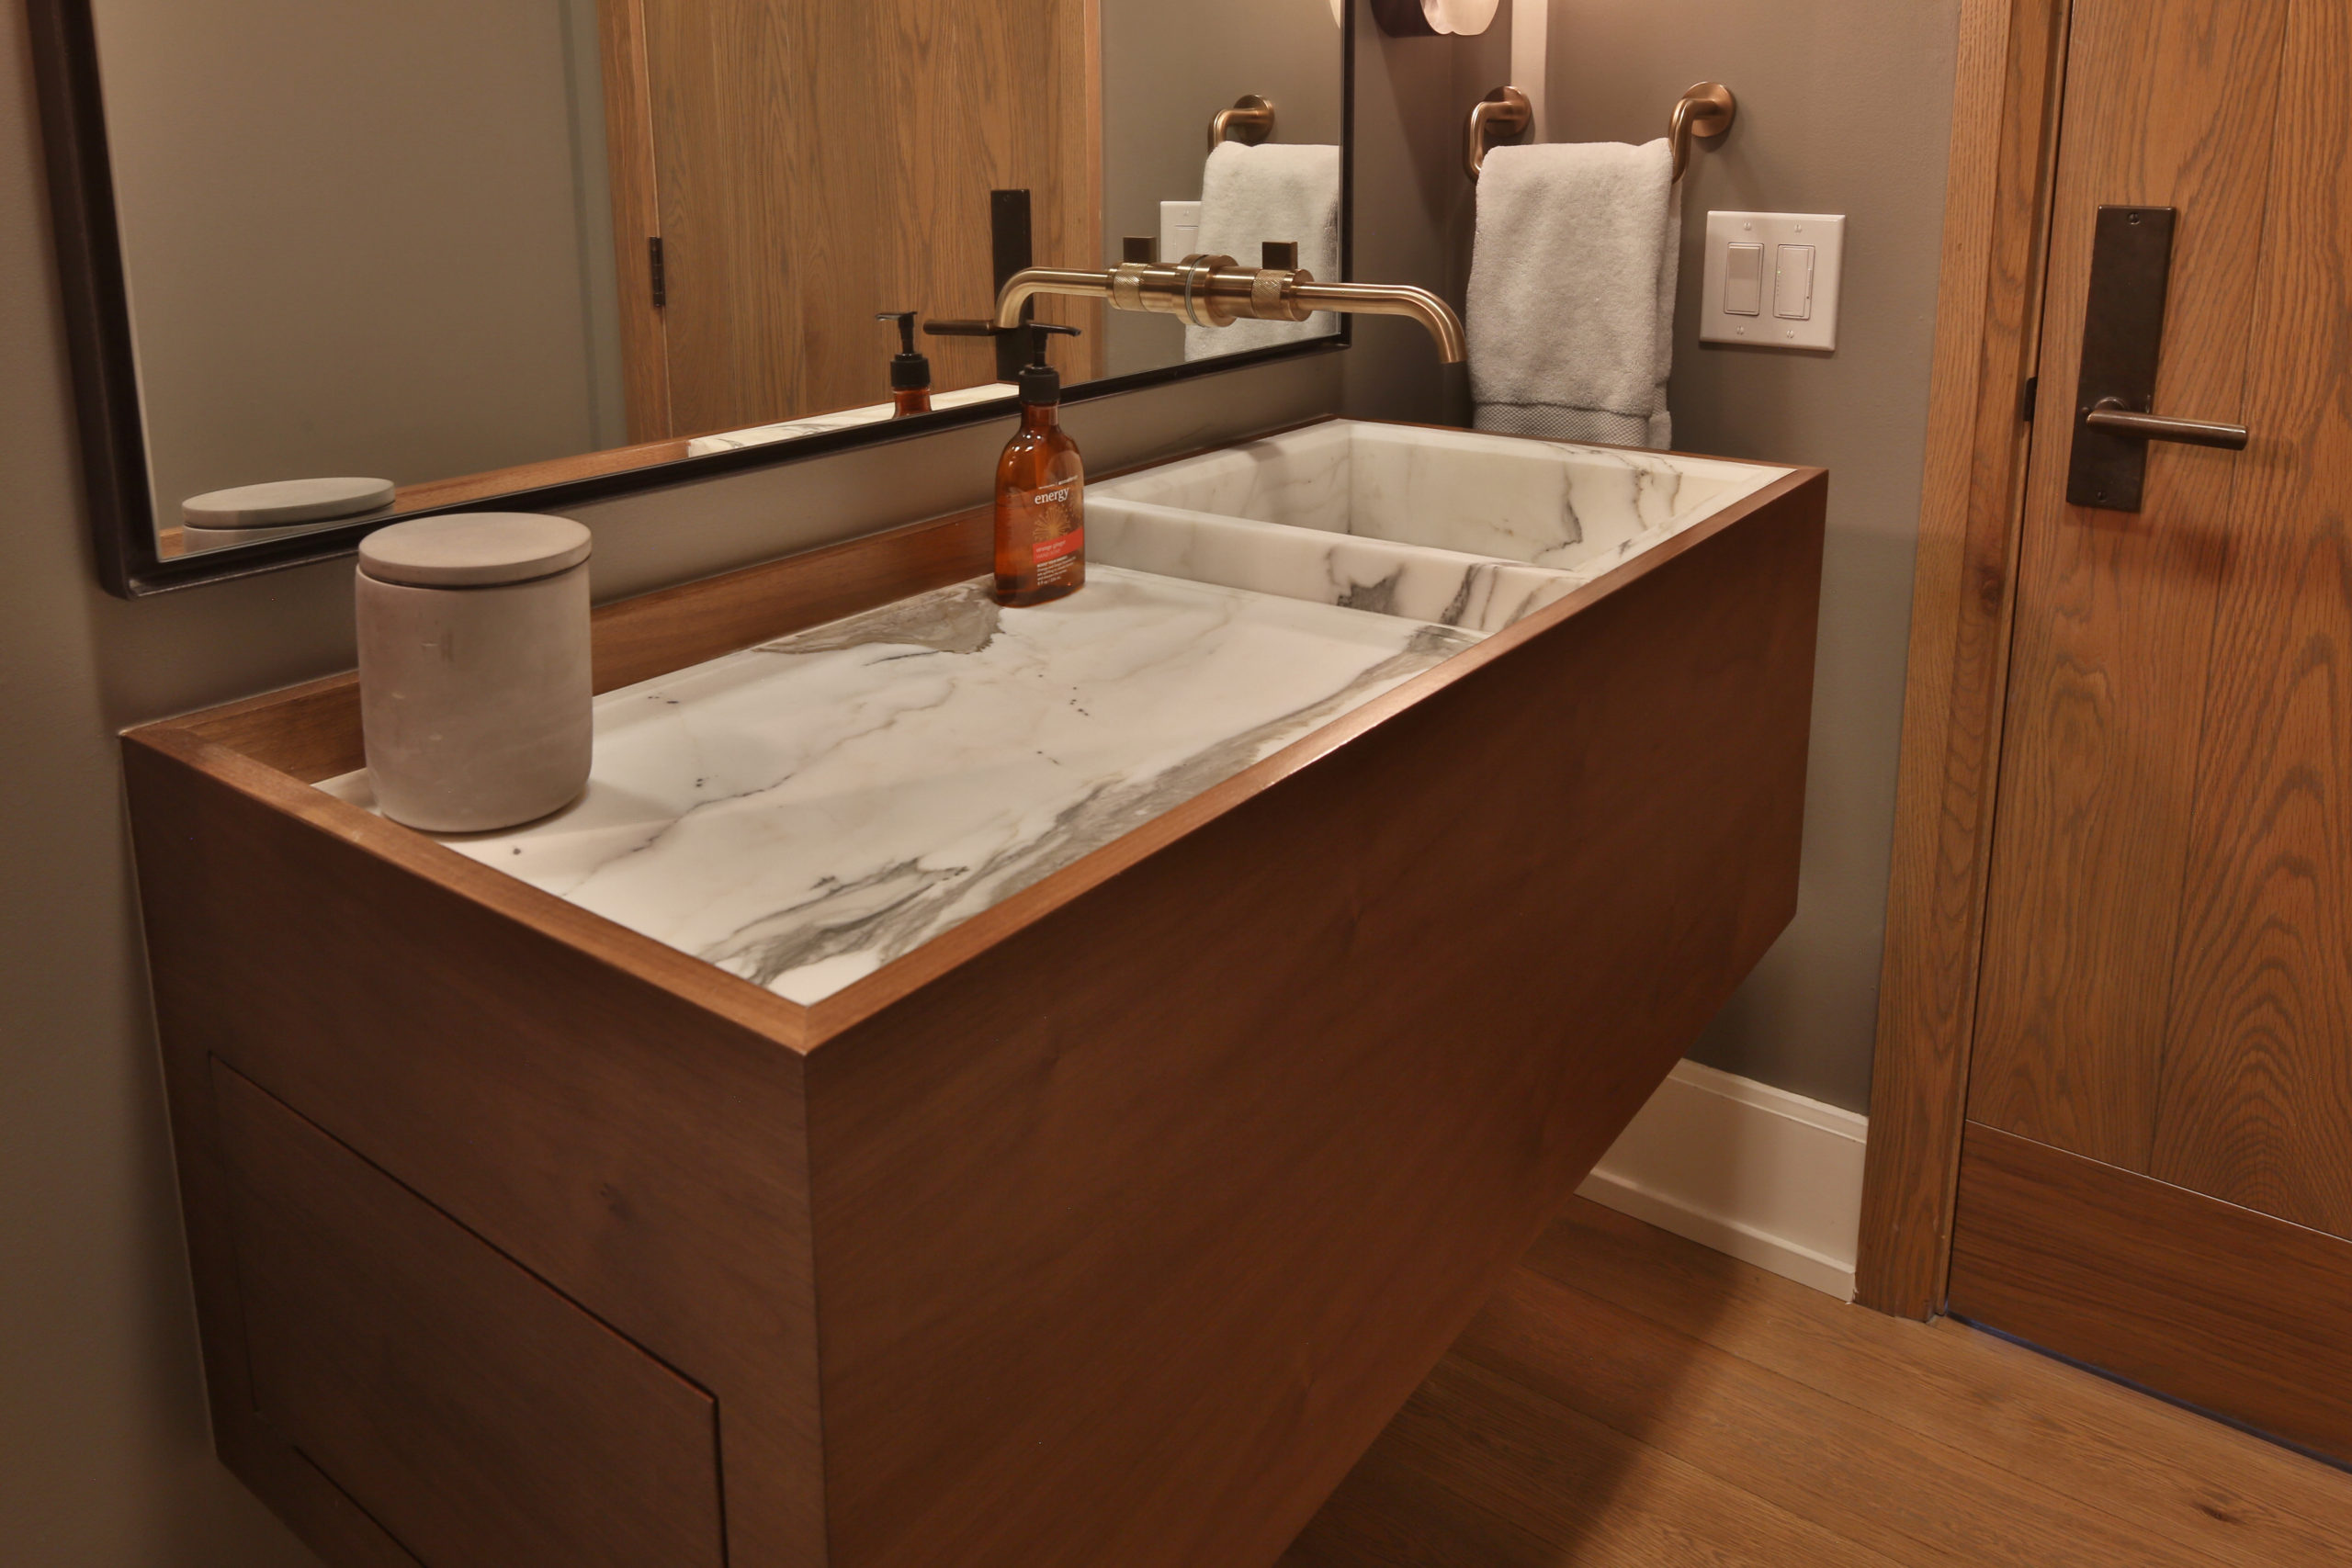 Modern style sleek single vanity with right side sink and large counter space